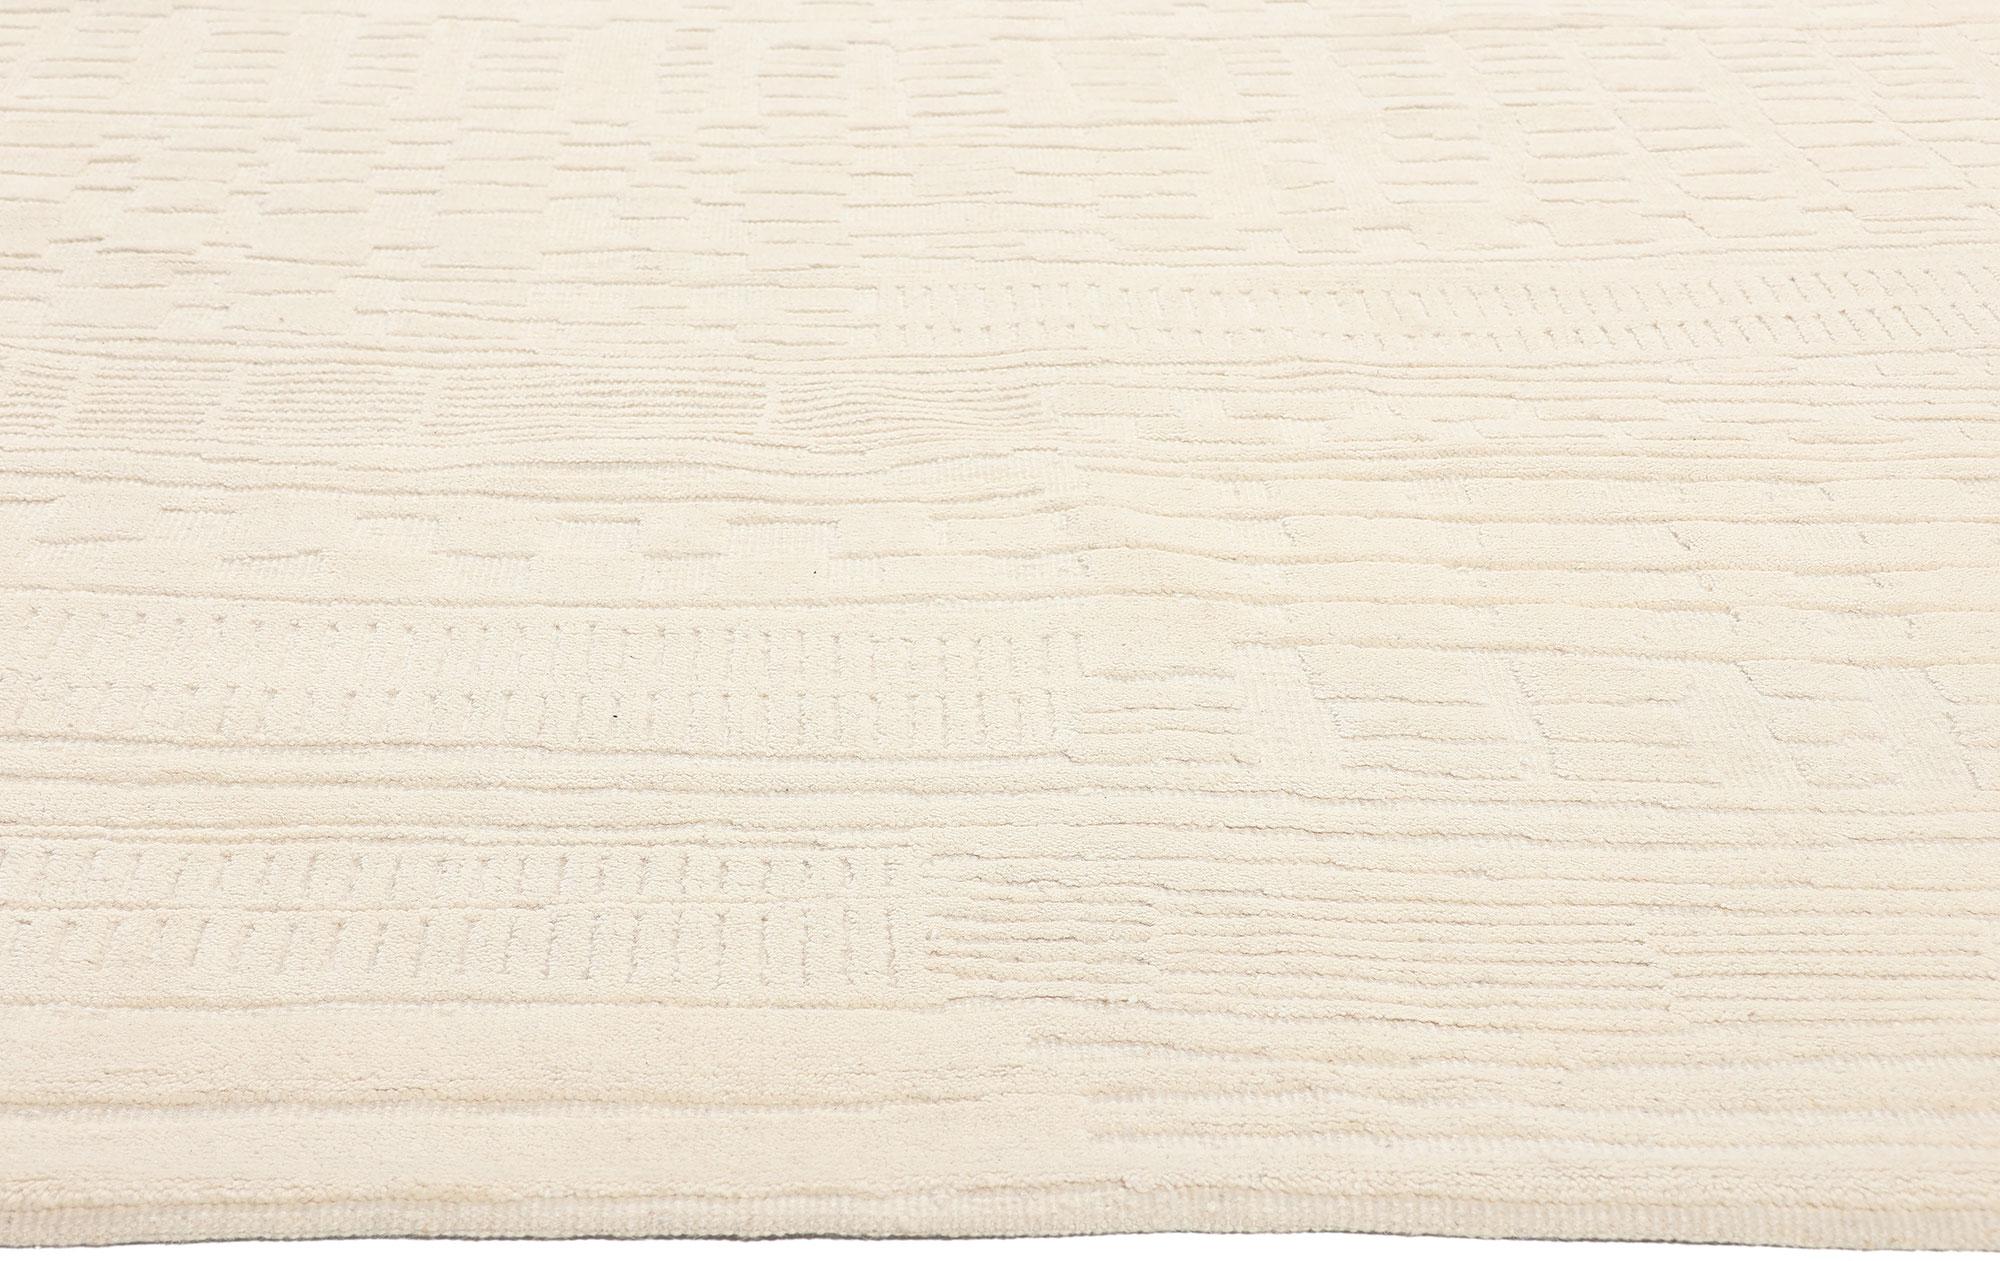 30985 Organic Modern High-Low Rug, 09'01 x 12'01.
​Subtle Shibui meets Bauhaus Minimalism in this organic modern high-low rug. The layers of tantalizing textures and monochromatic color scheme woven into this piece work together capturing the